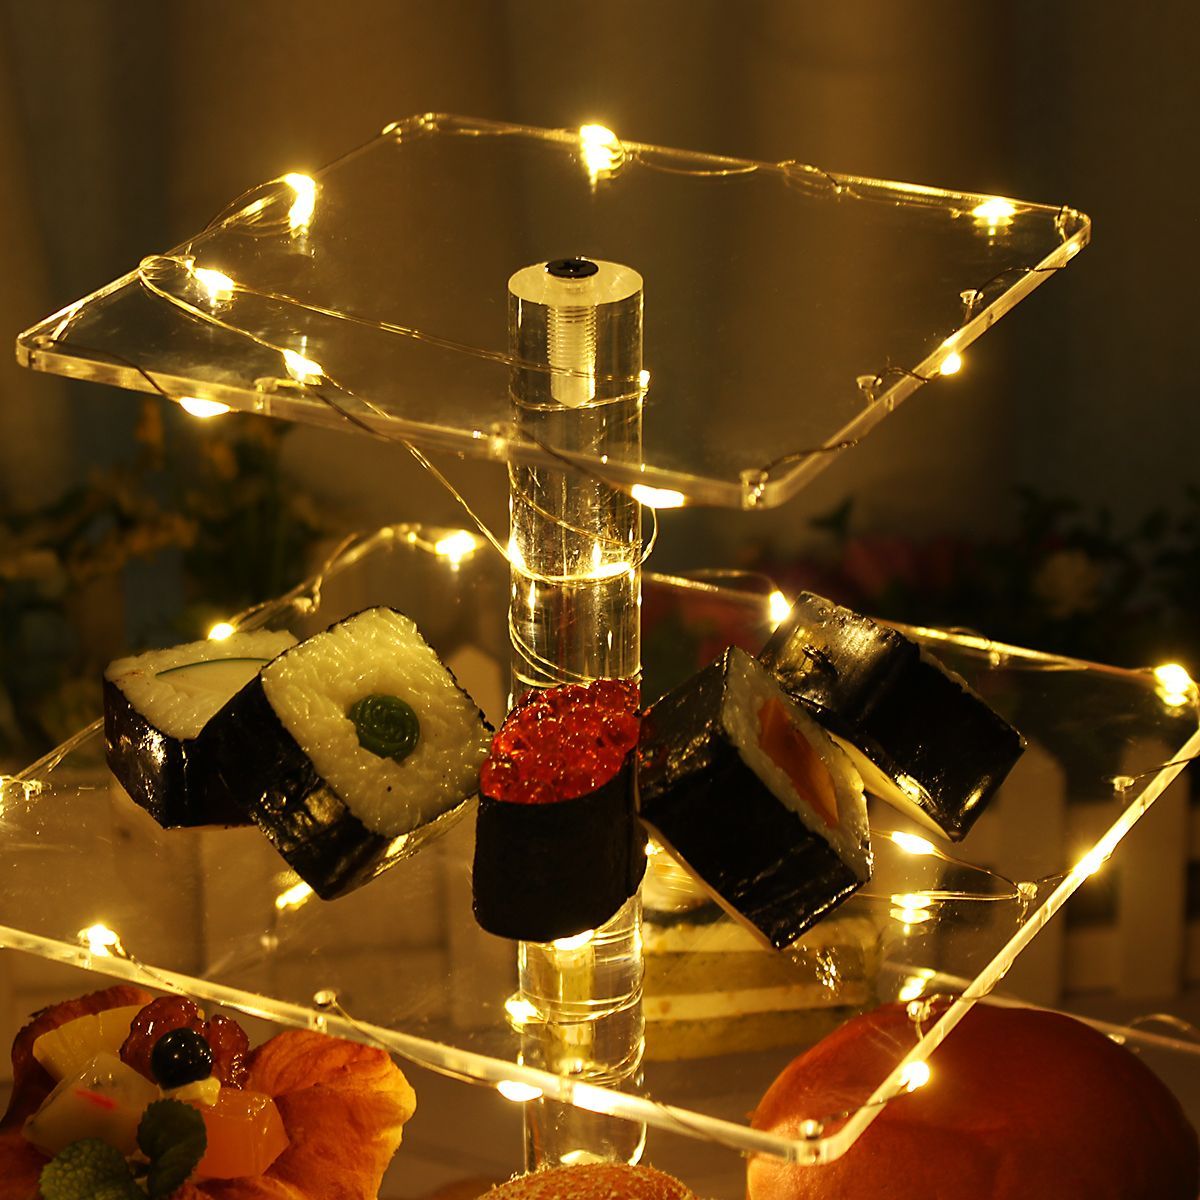 4-Layer-Cake-Cup-Stand-Tray-Wedding-Party-Cupcake-Display-Holder-LED-String-Light-1591019